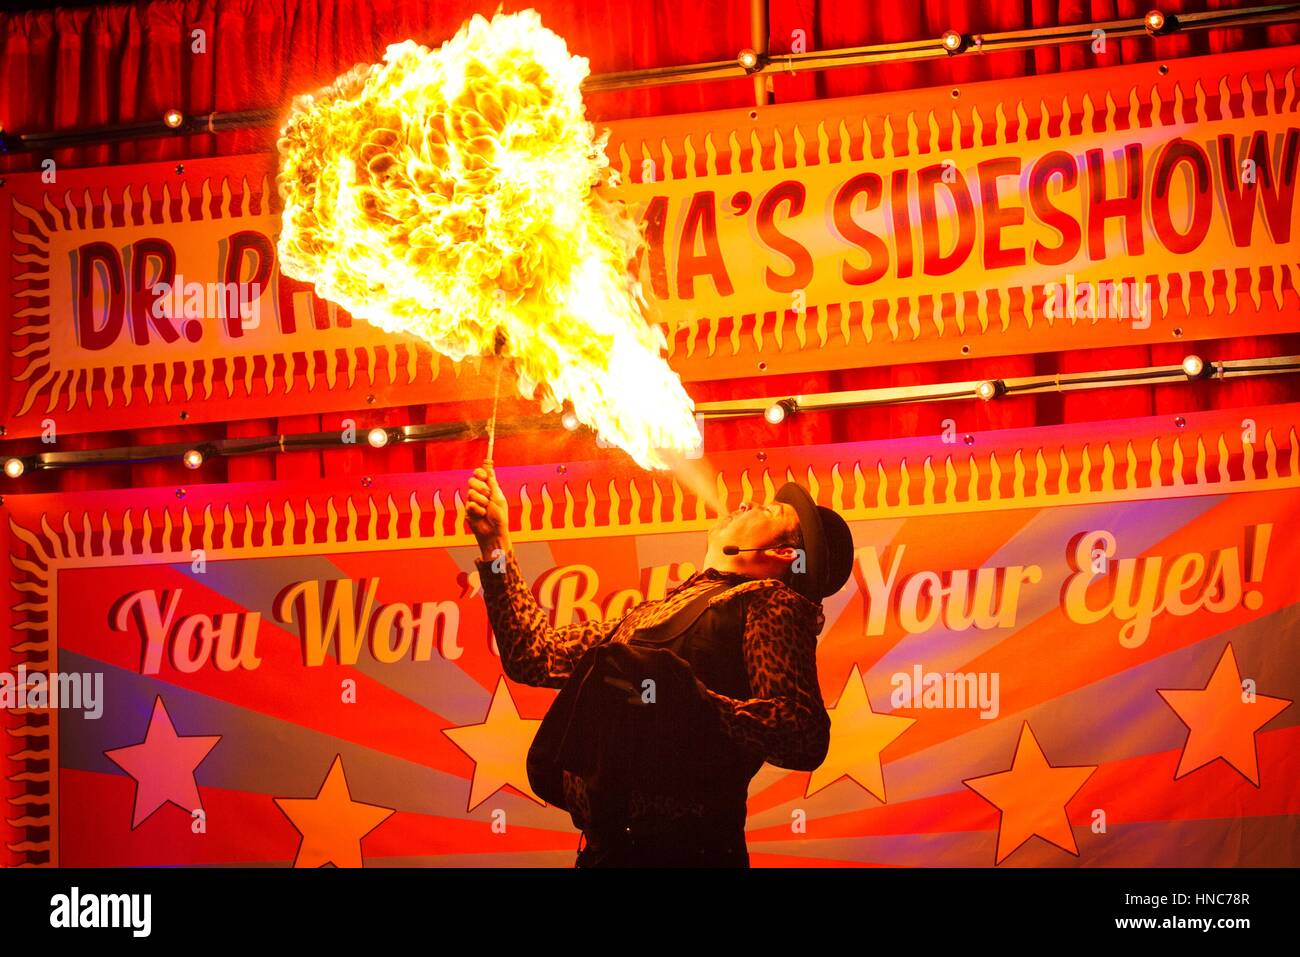 Blackpool, Lancashire, UK. 11th February 2017. Roll up! Roll up!! 'SHOWZAM' Festival sideshow returns to Blackpool, Lancashire.   Dr. Phantasma's fire spectacular show performed at the Winter Gardens, Blackpool.  Back for its 10th year the festival is packed with magic, sideshows & street theatre all over the famous north west town. Stock Photo